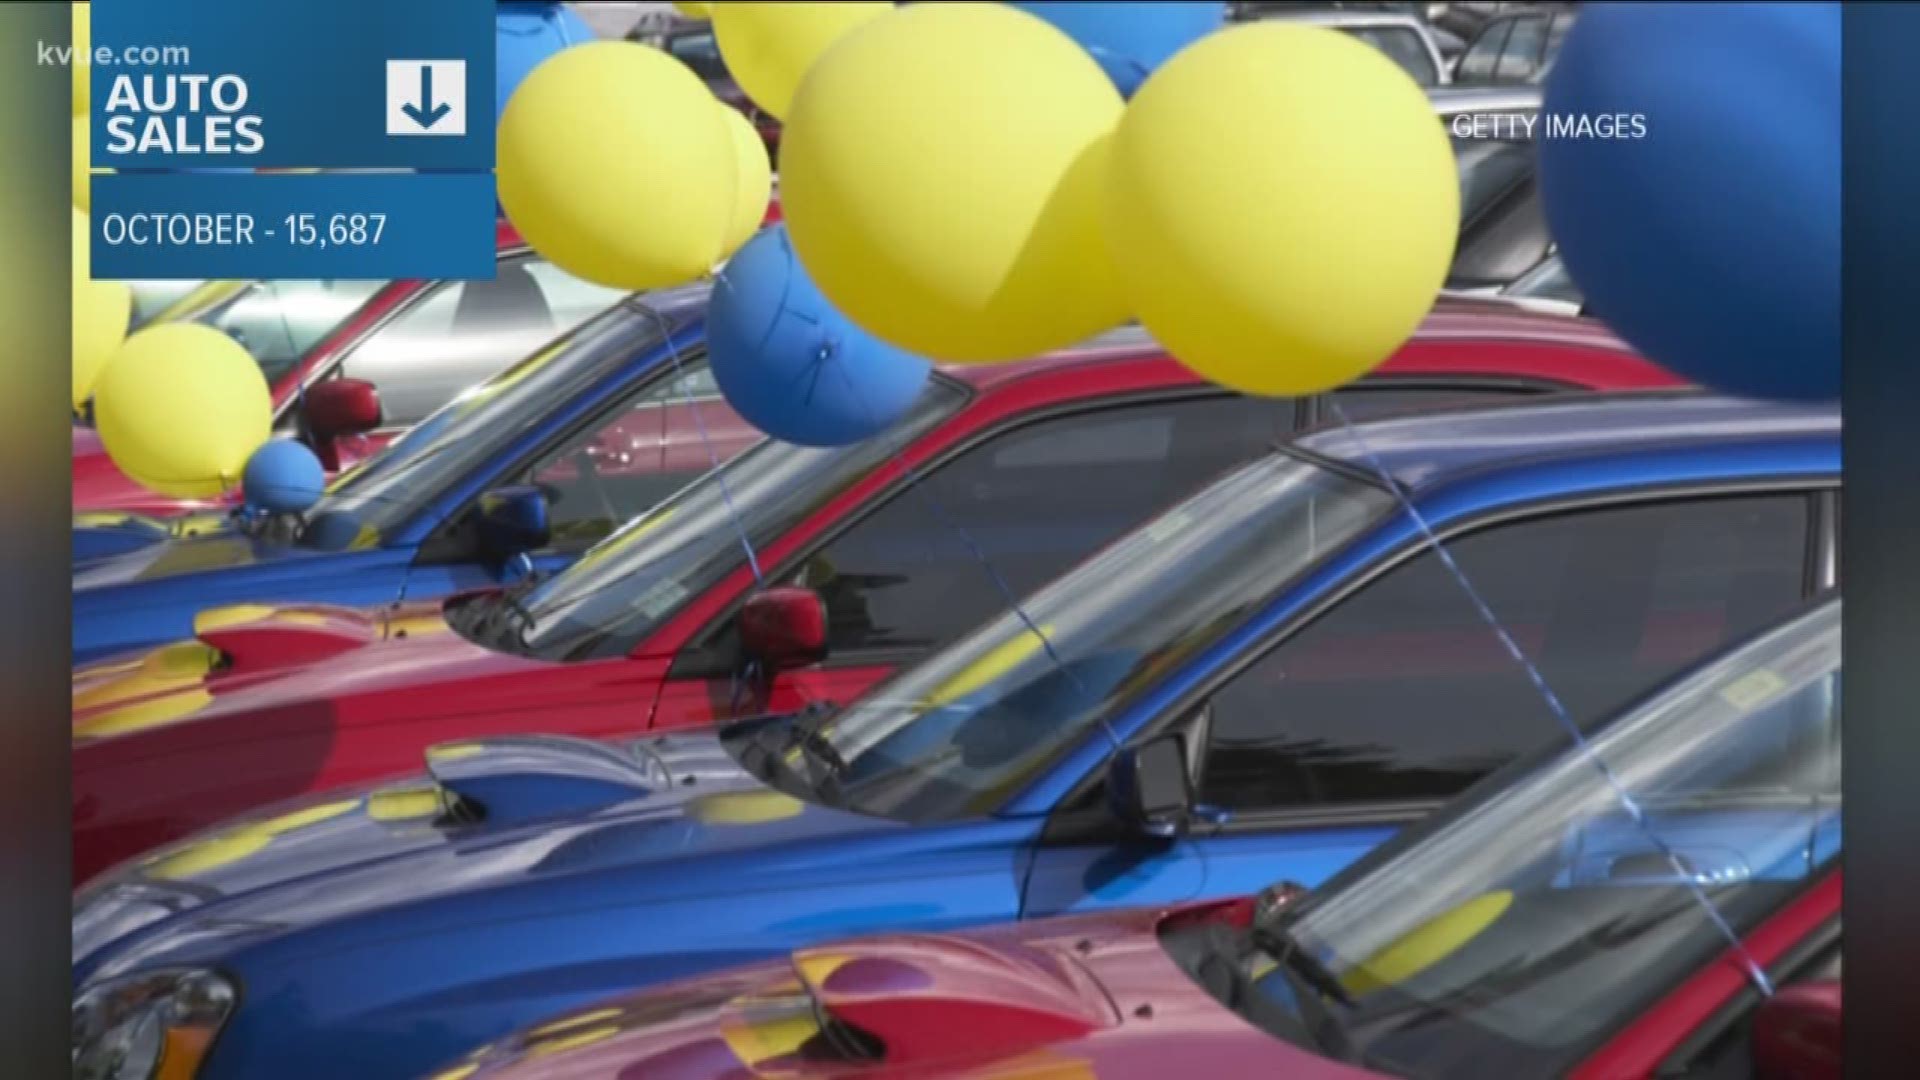 Central Texas auto dealers believe this could be a banner year for vehicle sales.